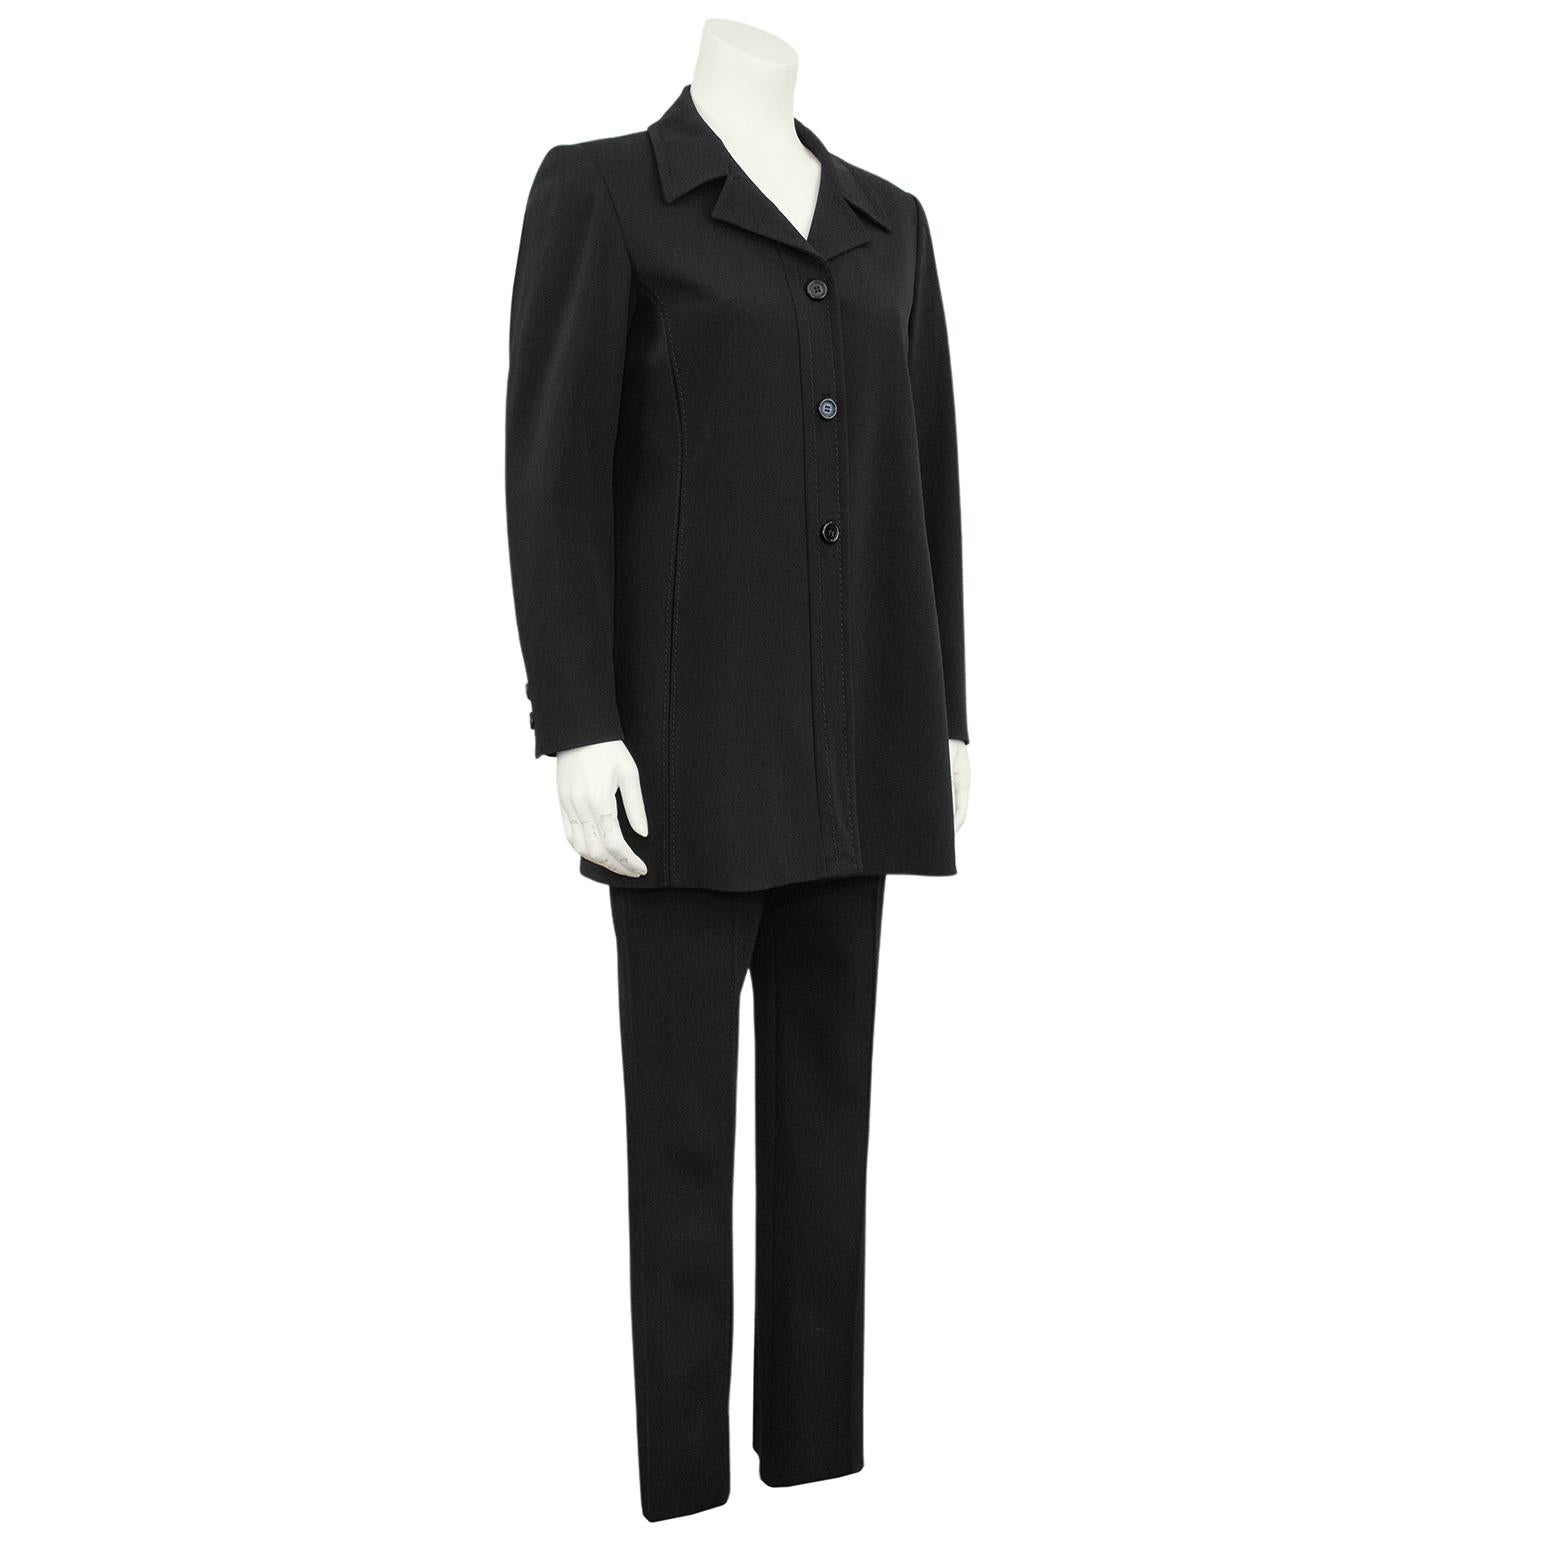 Very chic and minimal 1990s Prada pantsuit. Slightly oversized, long blazer with large notched collar, three buttons centre seam closure and double back vent. Coordinating mid rise pleated straight leg trousers with invisible side zipper. Tonal top